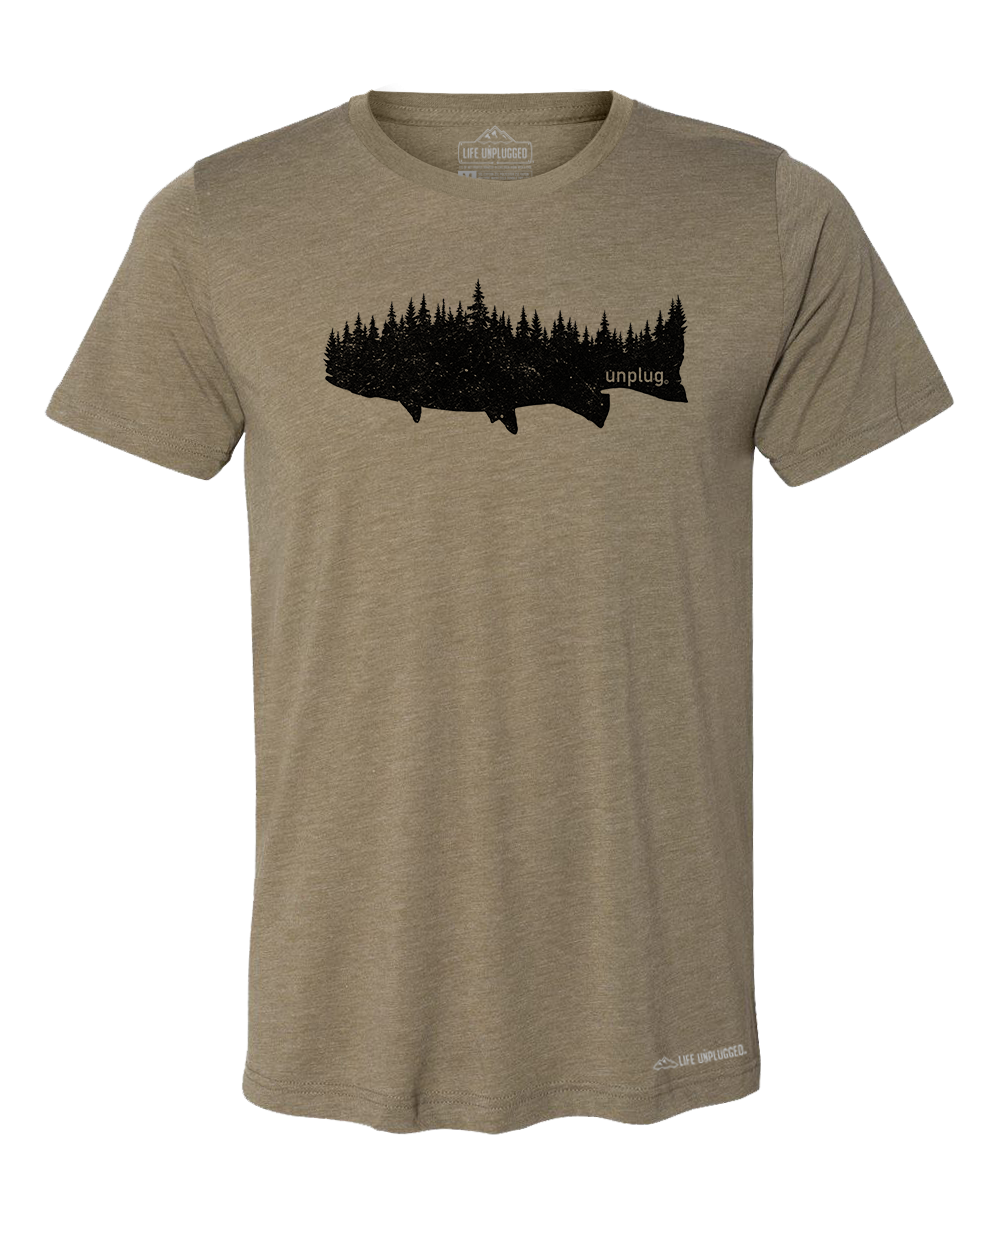 Trout in The Trees Premium Triblend T-Shirt - Life Unplugged